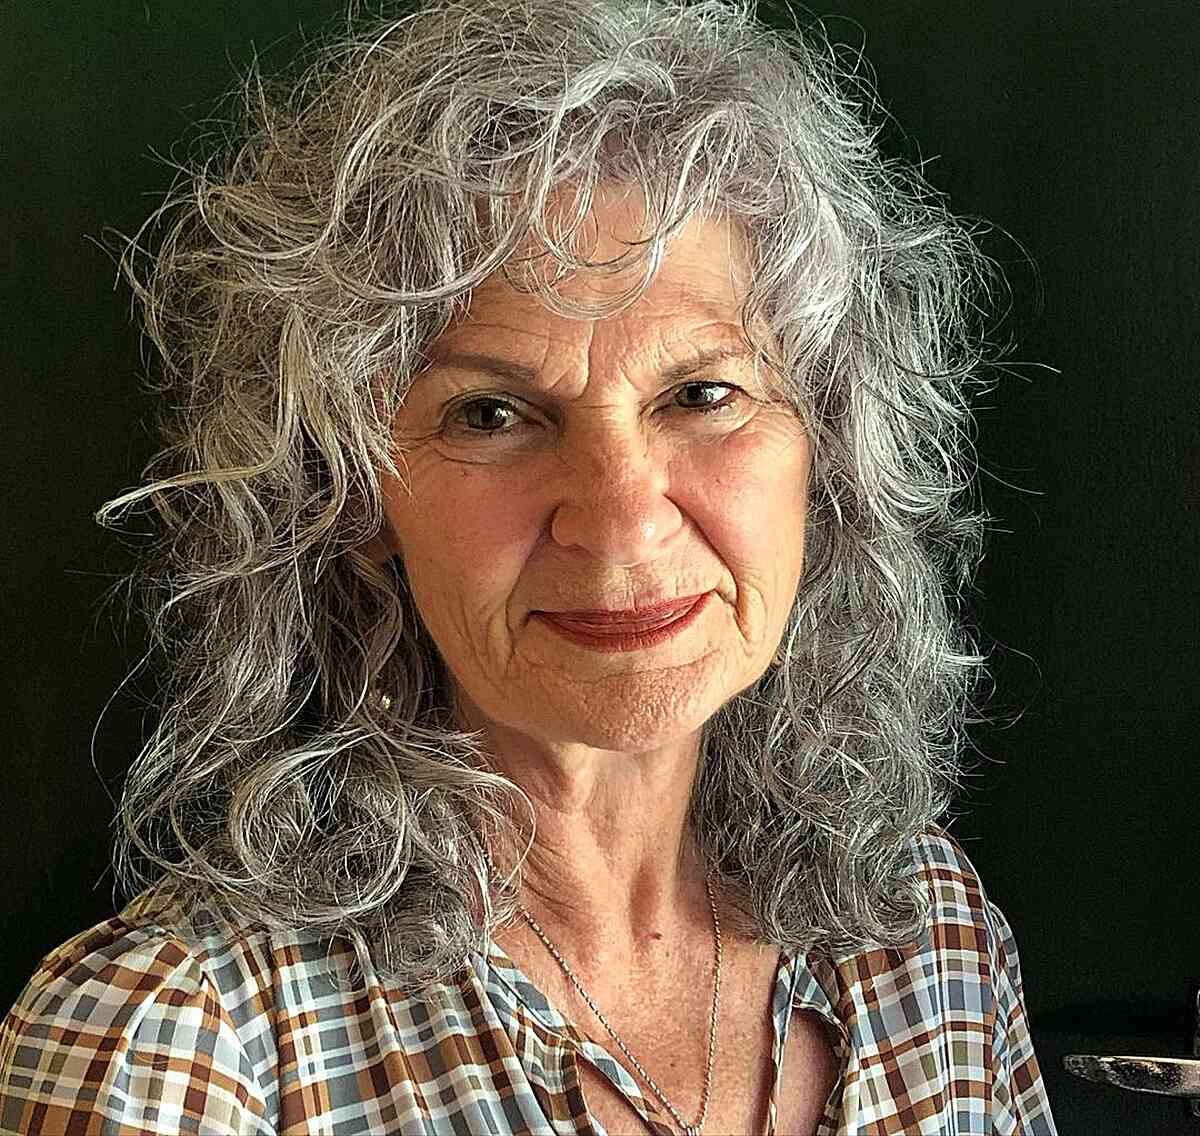 Messy and Frizzy Curly Shag with bangs for Ladies in their 60s with shoulder-length hair